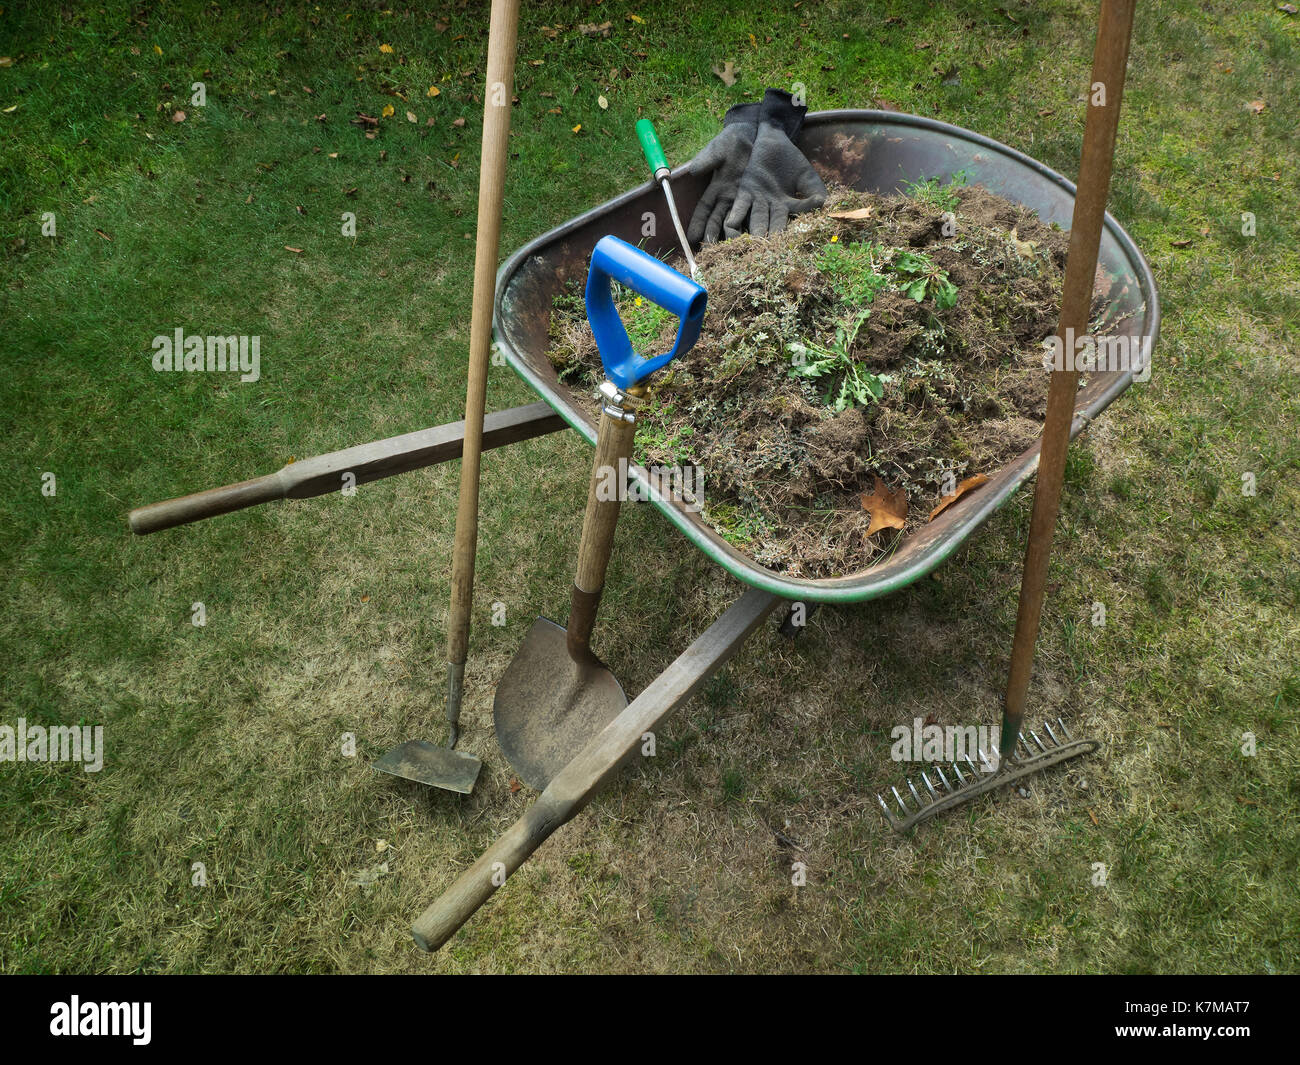 Wheelbarrow filled with lawn weeds Stock Photo